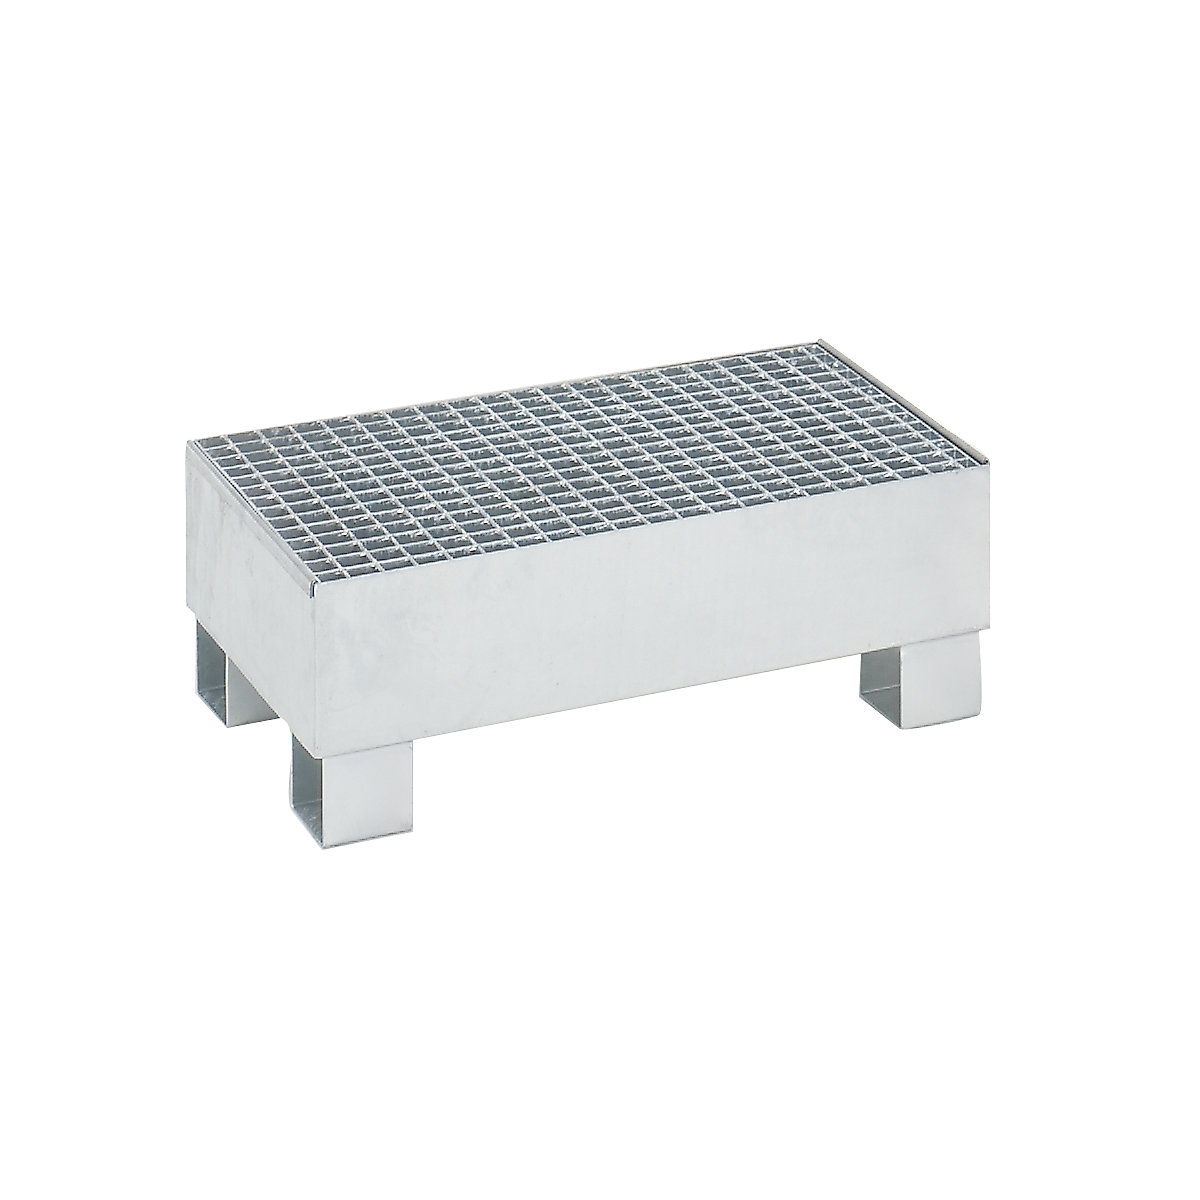 Sump tray for 60 l – eurokraft basic, LxWxH 800 x 500 x 290 mm, with certification, hot dip galvanised, with grate-4